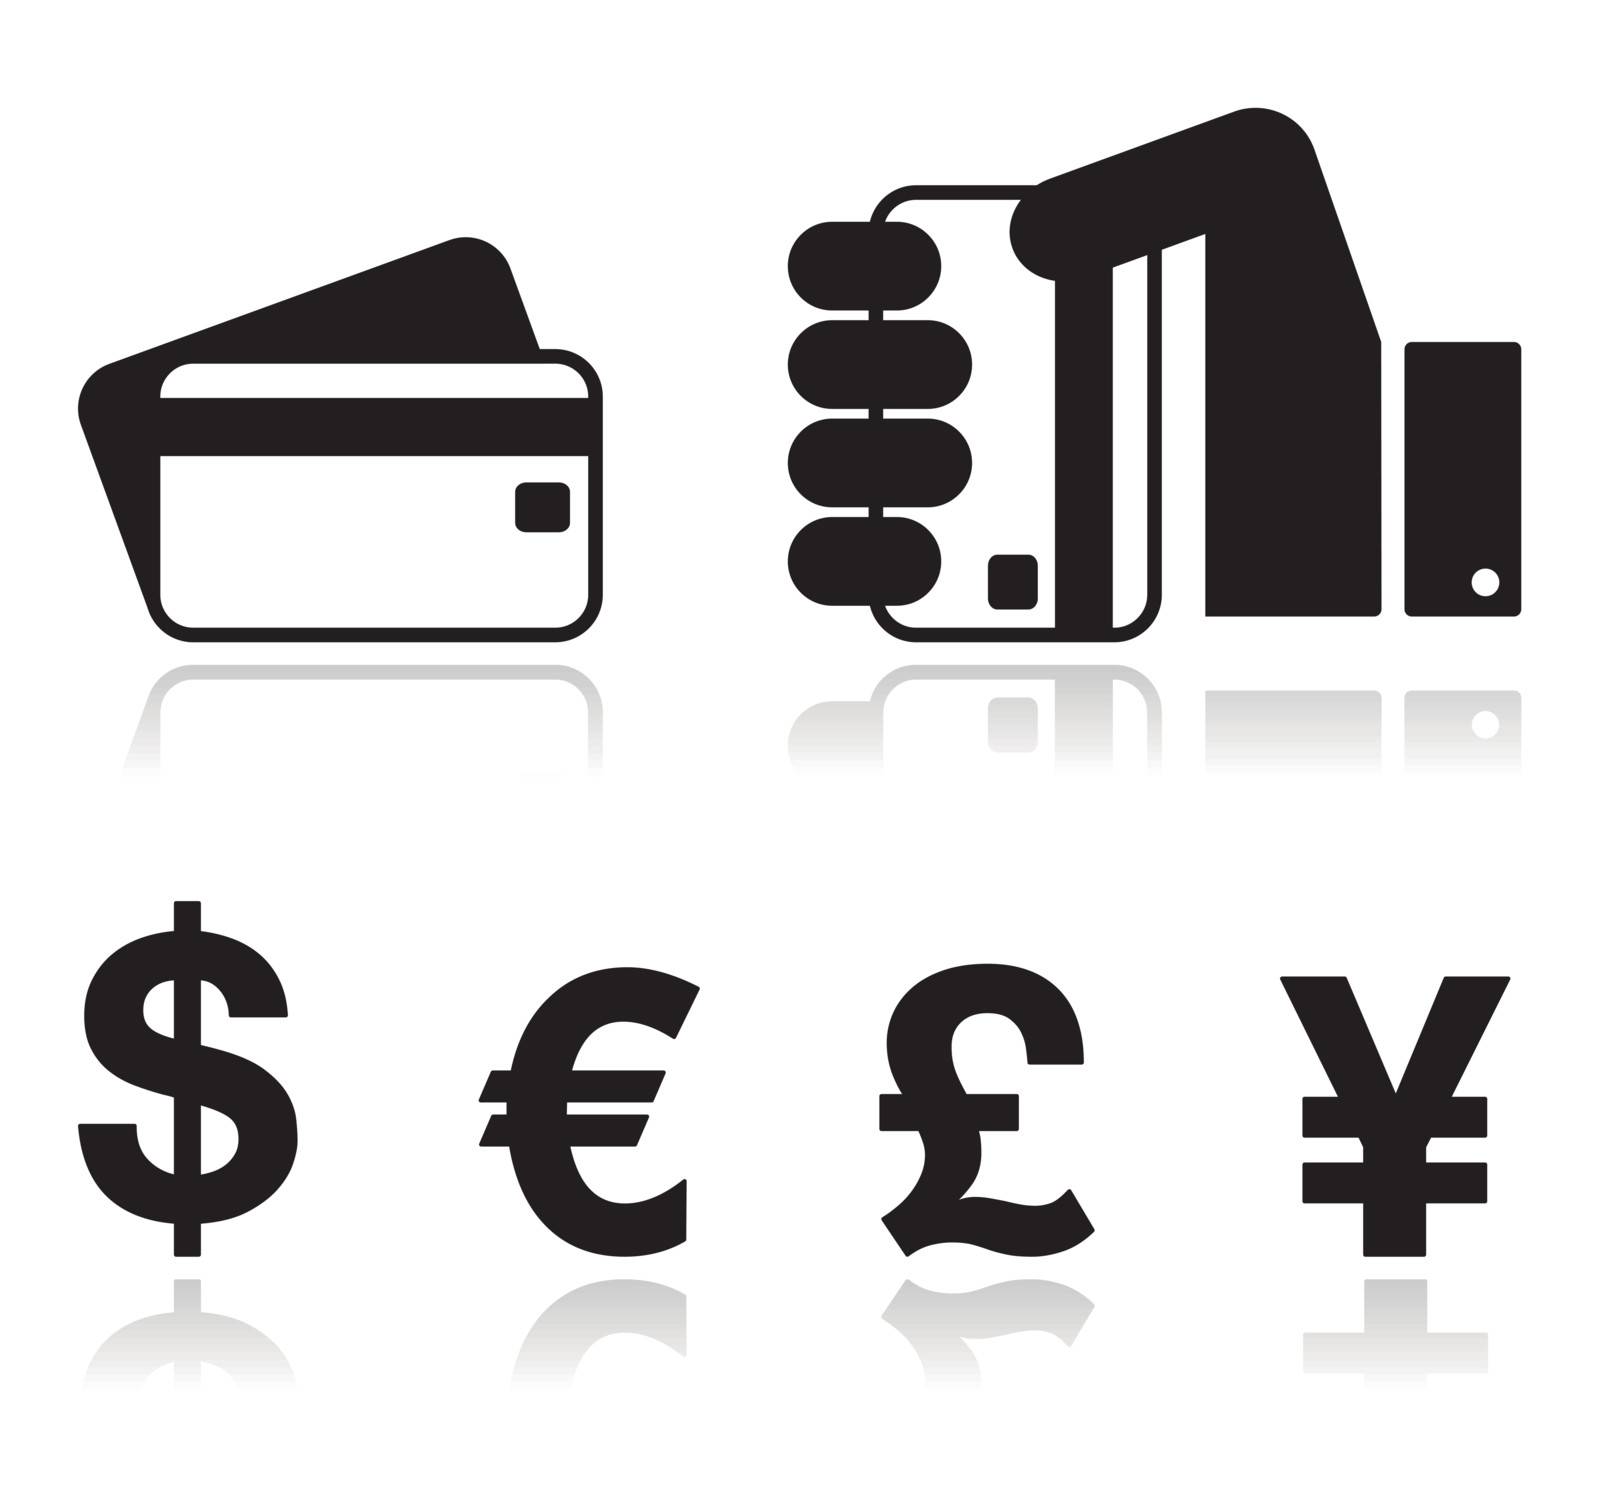 Payment methods icons set - credit card, by cash - currency by RedKoala